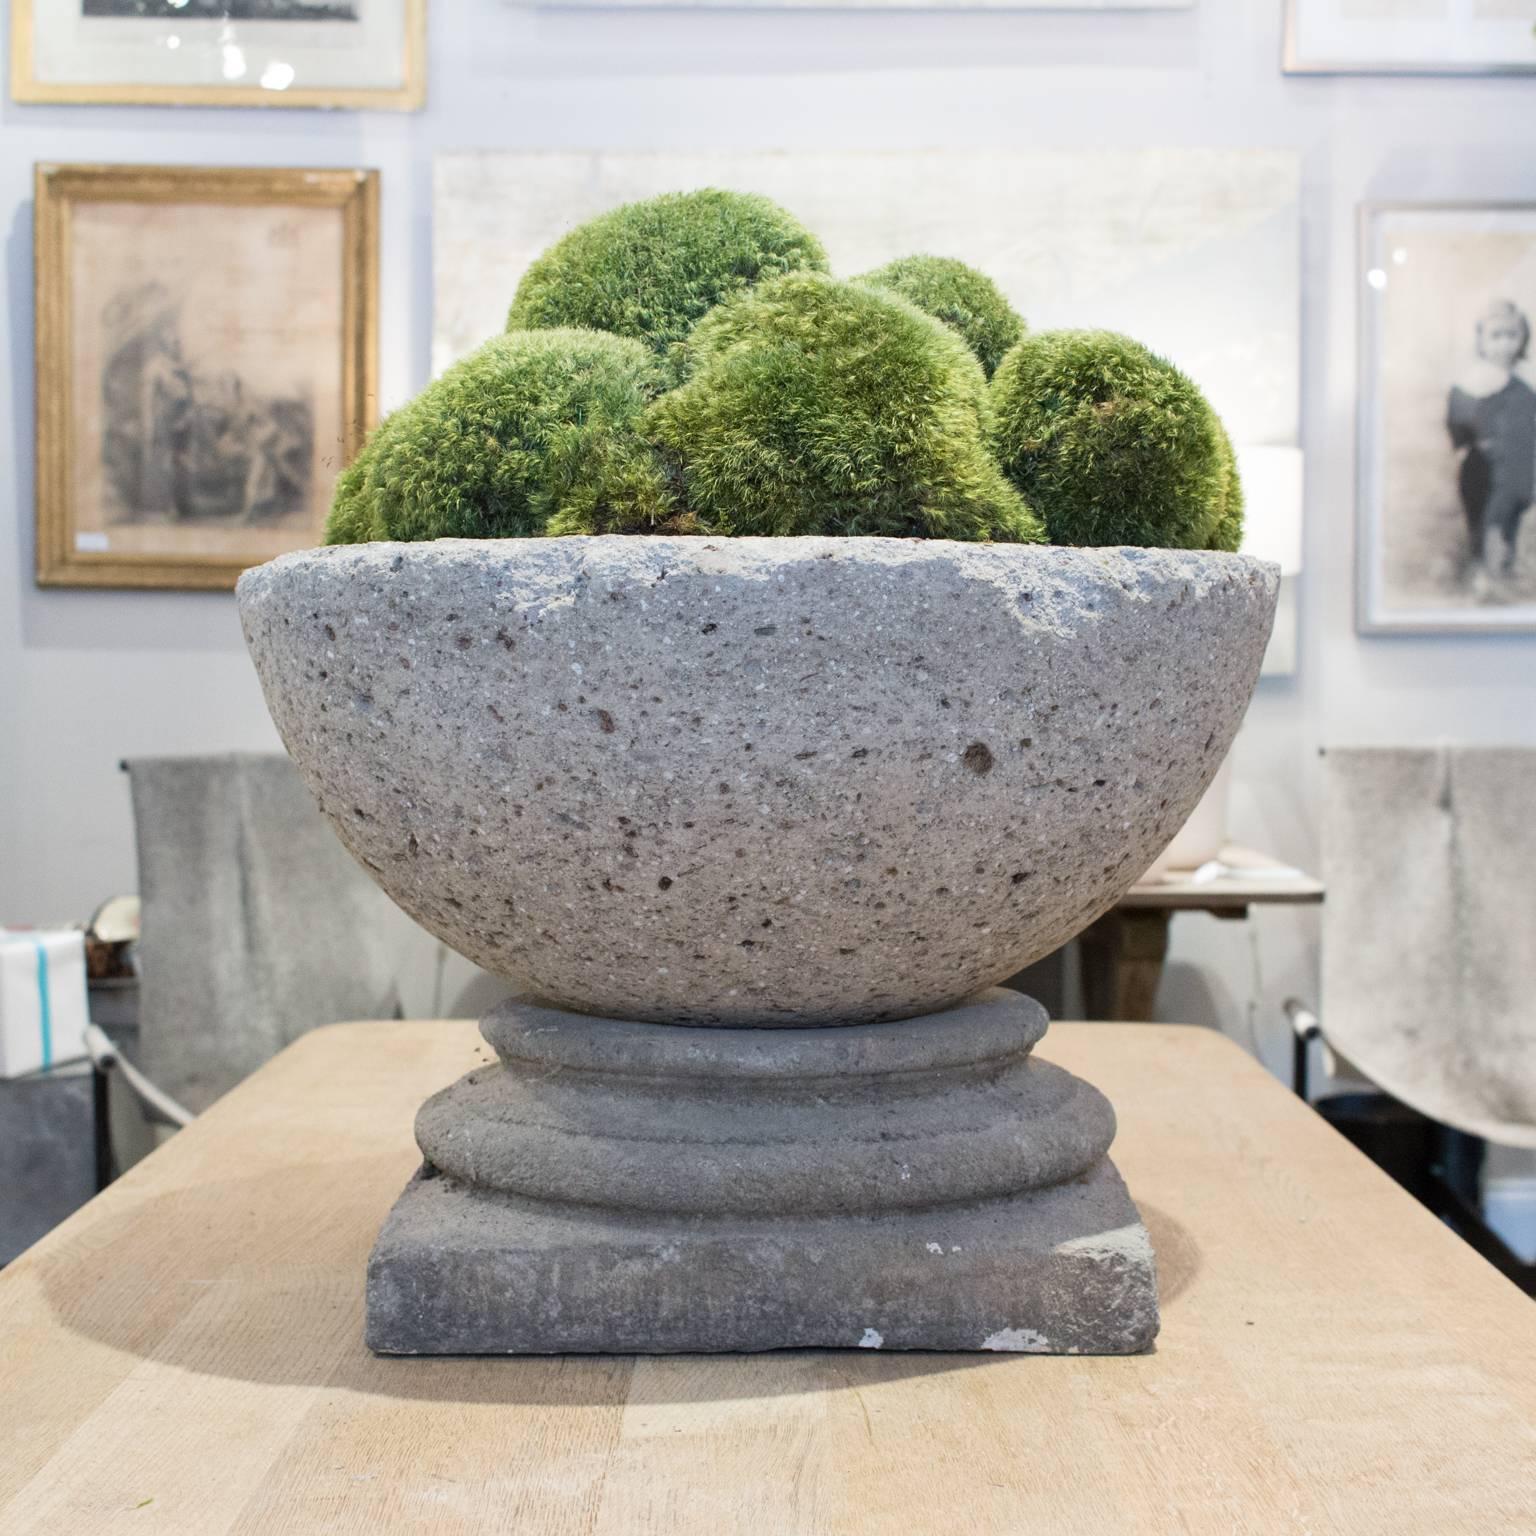 This stone centerpiece is actually made up of two separate pieces, the square base is cast stone and the bowl on top is cast hypertufa, which is an expanded stone that is slightly lighter than concrete. The bowl has been piled high with preserved